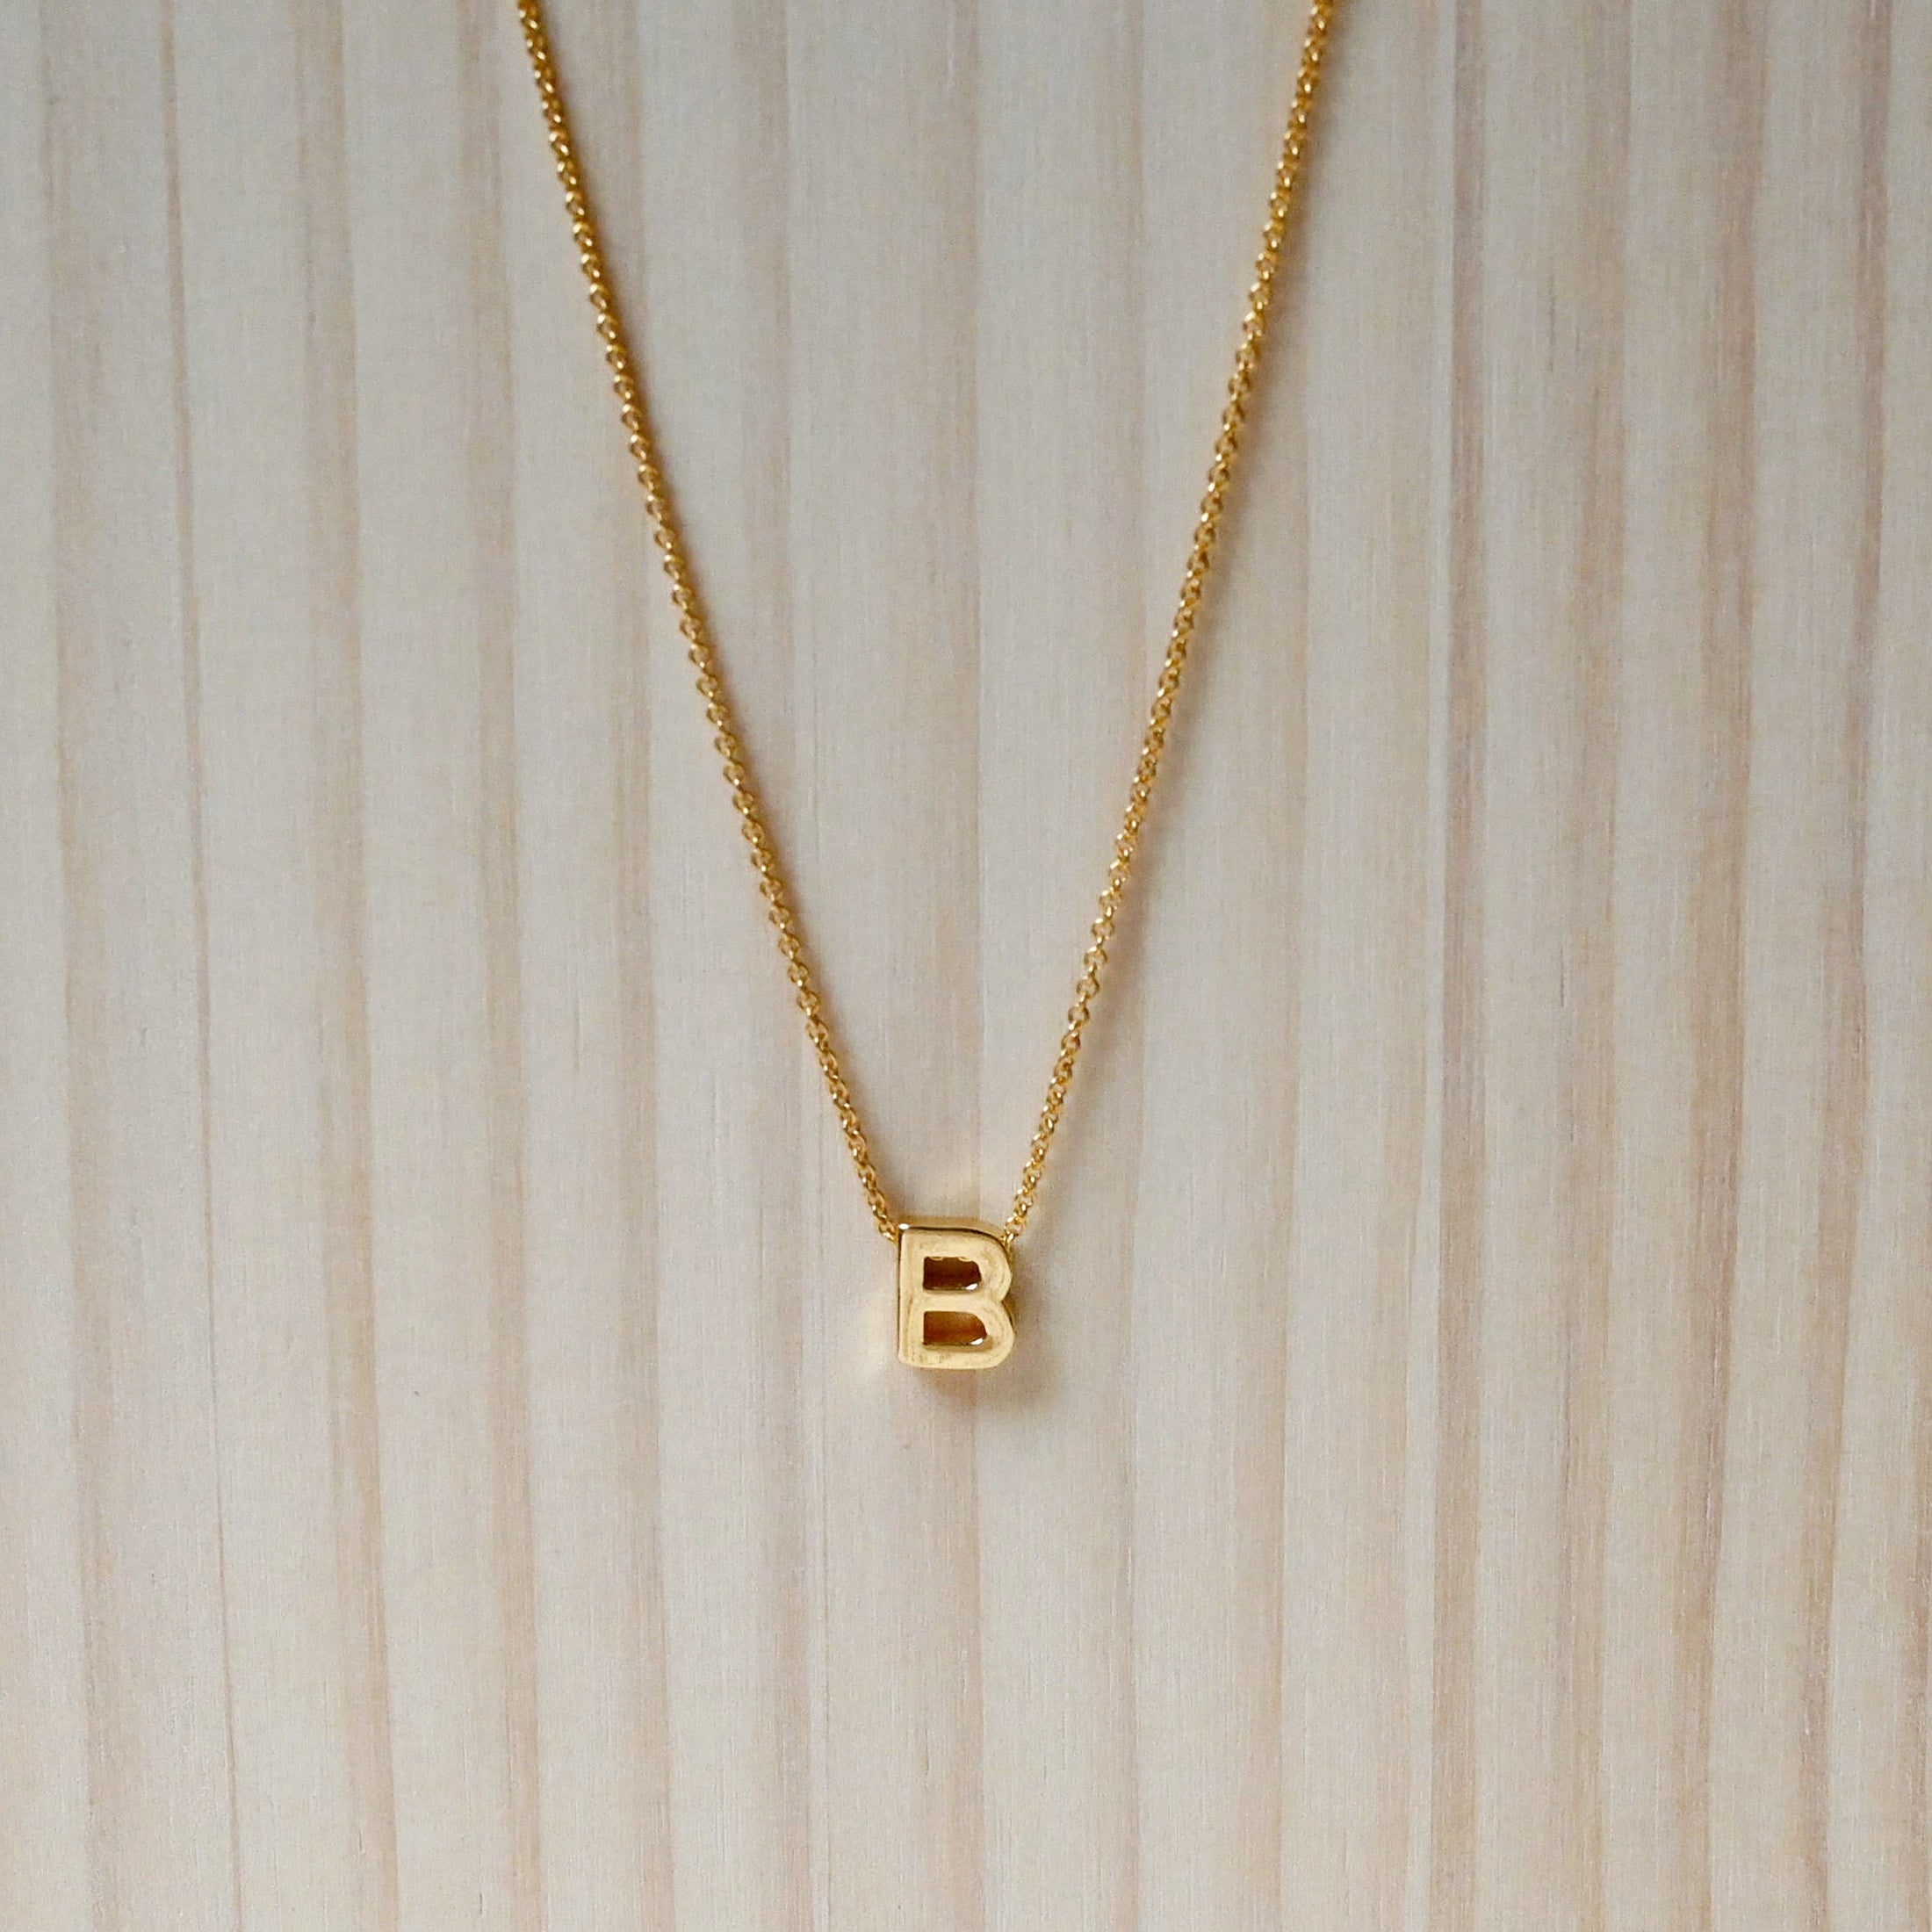 Initial necklace B